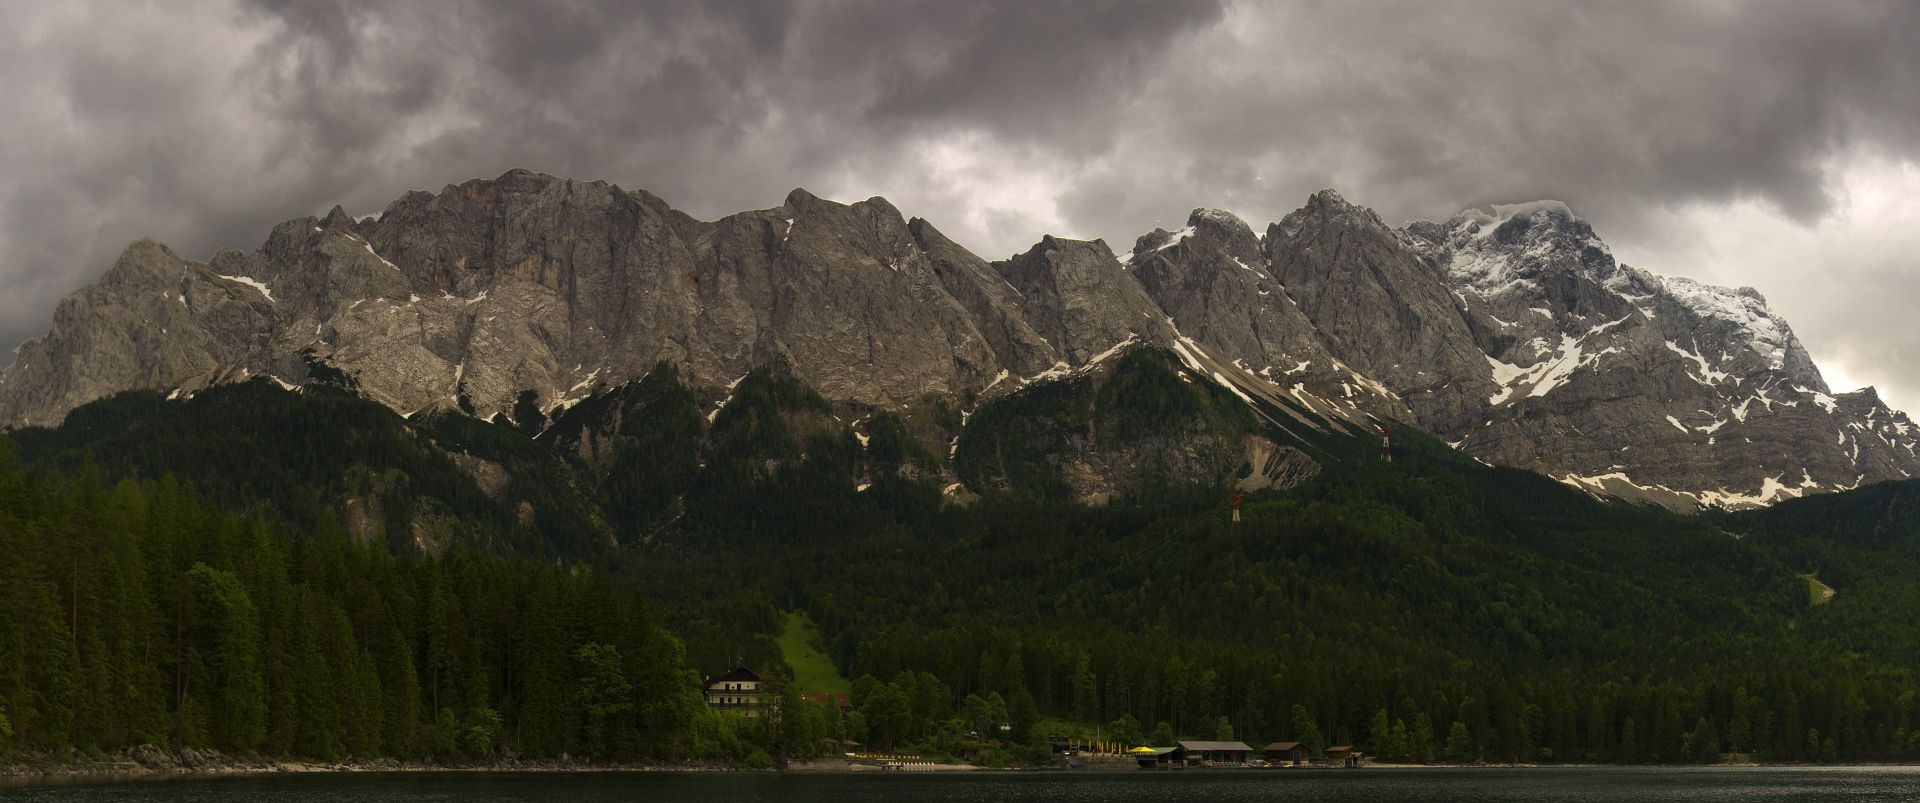 Mt Zugspitze seen from The Eibsee lake